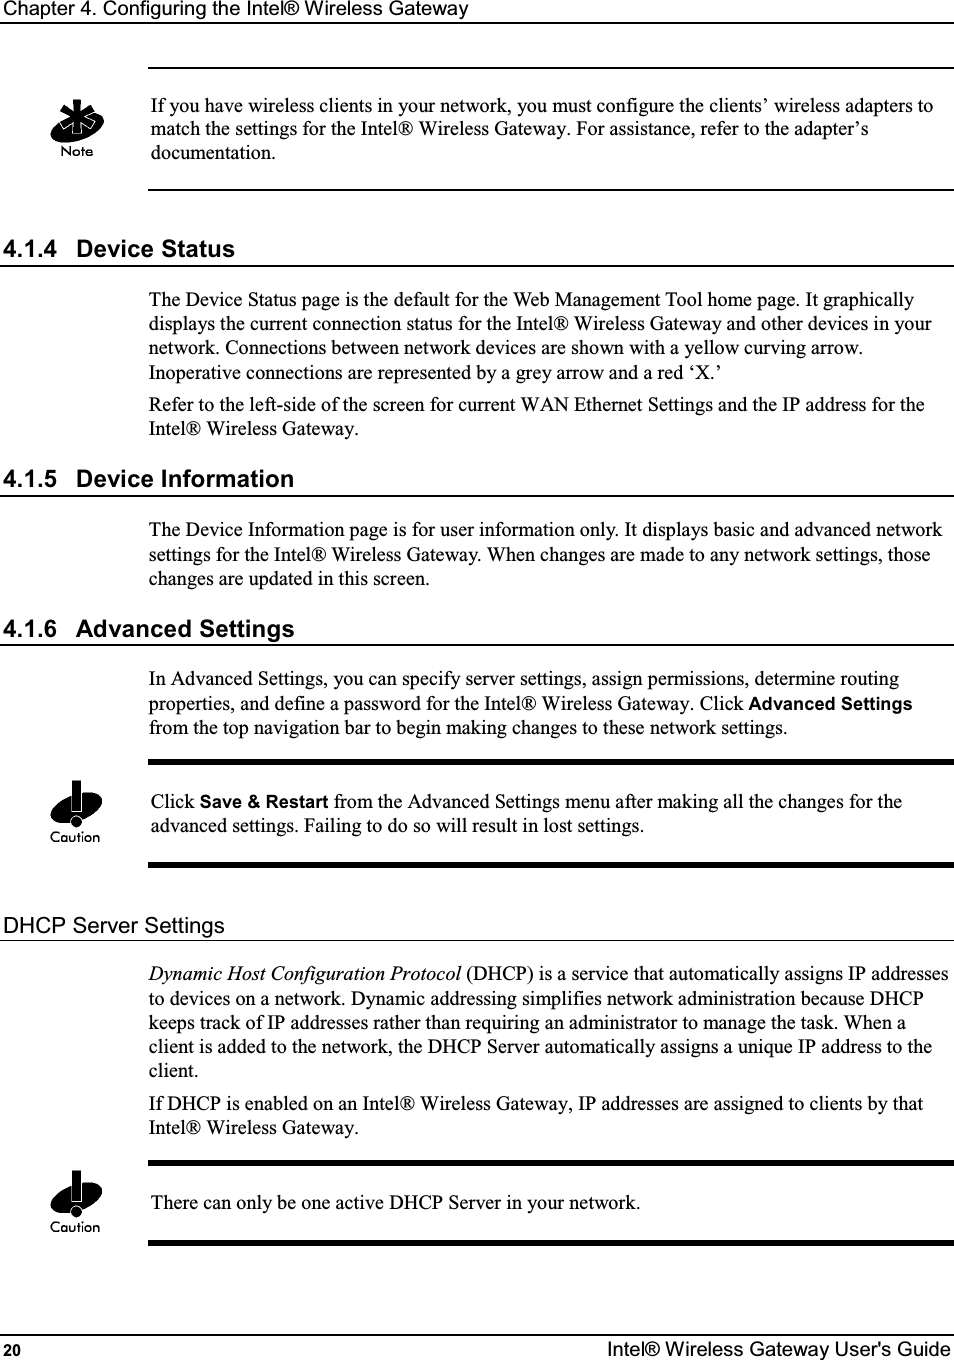 Chapter 4. Configuring the Intel® Wireless Gateway 20  Intel® Wireless Gateway User&apos;s Guide   If you have wireless clients in your network, you must configure the clients’ wireless adapters to match the settings for the Intel® Wireless Gateway. For assistance, refer to the adapter’s documentation.  4.1.4  Device Status The Device Status page is the default for the Web Management Tool home page. It graphically displays the current connection status for the Intel® Wireless Gateway and other devices in your network. Connections between network devices are shown with a yellow curving arrow. Inoperative connections are represented by a grey arrow and a red ‘X.’ Refer to the left-side of the screen for current WAN Ethernet Settings and the IP address for the Intel® Wireless Gateway. 4.1.5  Device Information The Device Information page is for user information only. It displays basic and advanced network settings for the Intel® Wireless Gateway. When changes are made to any network settings, those changes are updated in this screen. 4.1.6  Advanced Settings In Advanced Settings, you can specify server settings, assign permissions, determine routing properties, and define a password for the Intel® Wireless Gateway. Click Advanced Settings from the top navigation bar to begin making changes to these network settings.   Click Save &amp; Restart from the Advanced Settings menu after making all the changes for the advanced settings. Failing to do so will result in lost settings.  DHCP Server Settings Dynamic Host Configuration Protocol (DHCP) is a service that automatically assigns IP addresses to devices on a network. Dynamic addressing simplifies network administration because DHCP keeps track of IP addresses rather than requiring an administrator to manage the task. When a client is added to the network, the DHCP Server automatically assigns a unique IP address to the client.  If DHCP is enabled on an Intel® Wireless Gateway, IP addresses are assigned to clients by that Intel® Wireless Gateway.   There can only be one active DHCP Server in your network.  